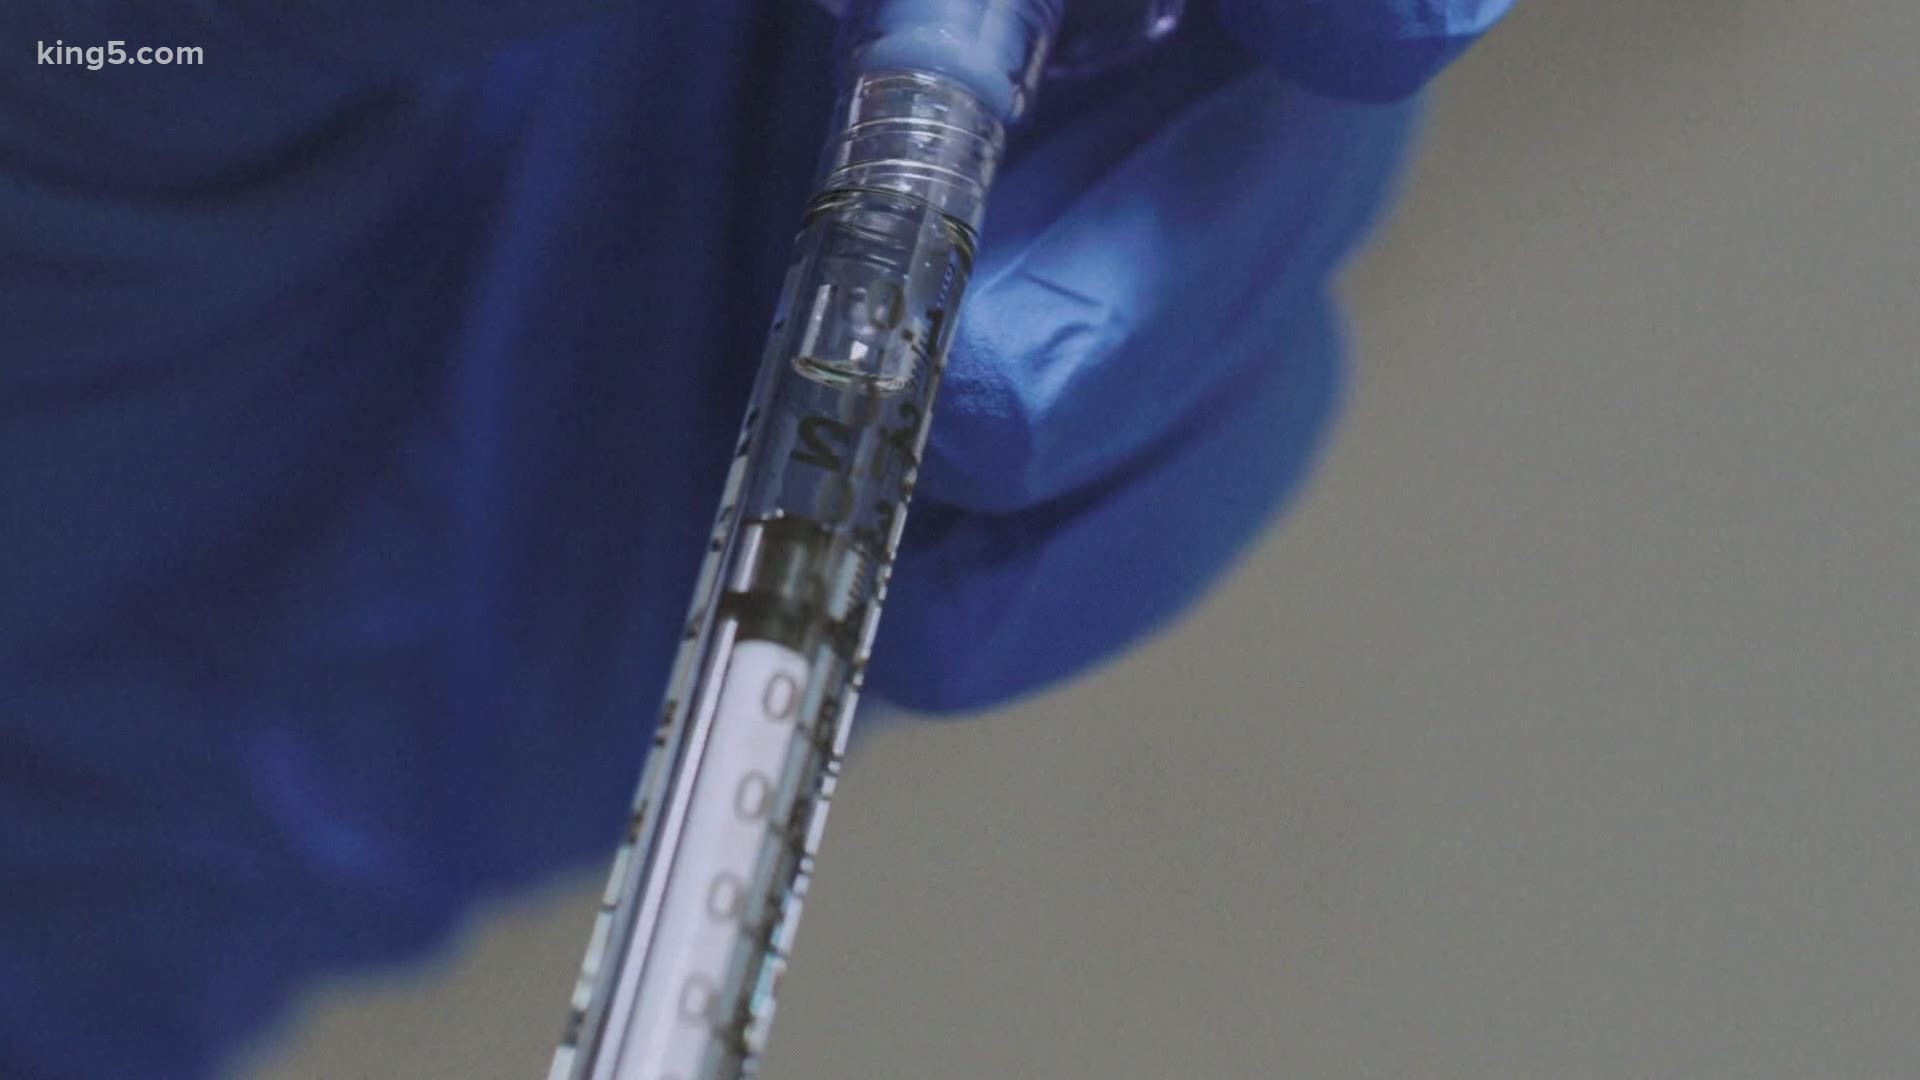 Legally, employers could make a COVID-19 vaccine a condition of employment. But a UW law professor says he thinks that's unlikely to happen.